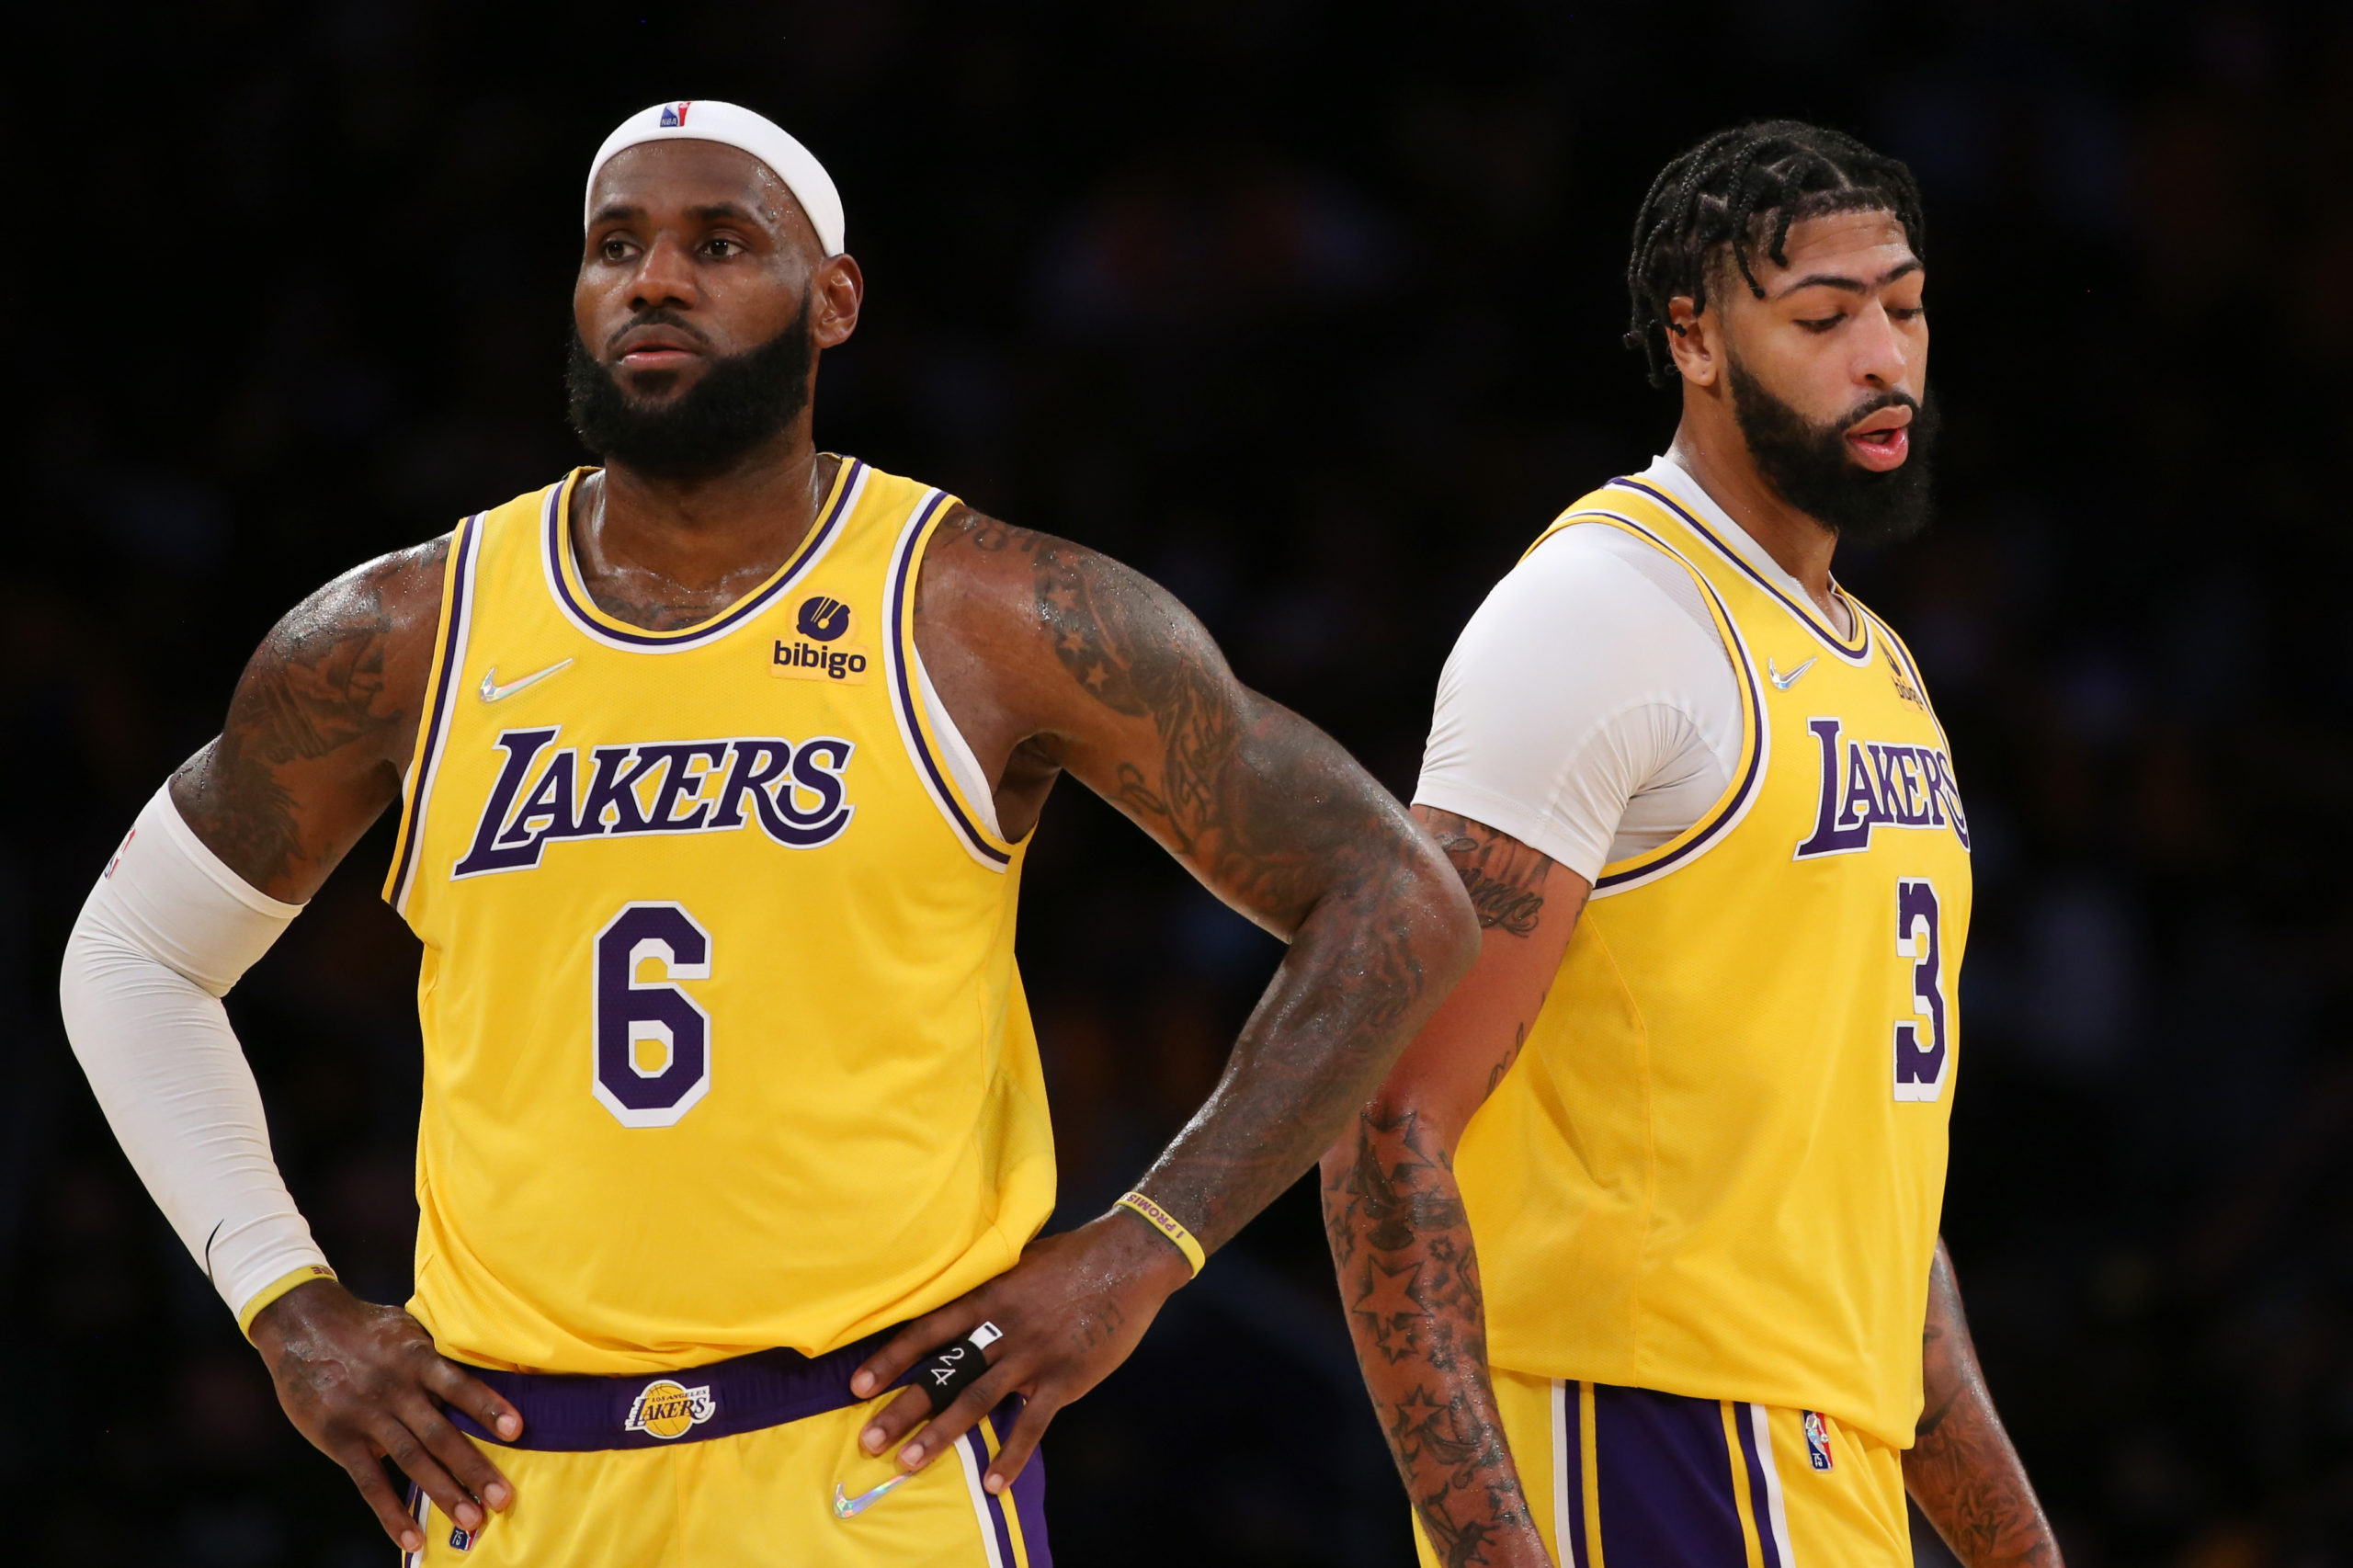 Los Angeles Lakers forward LeBron James (6) and forward Anthony Davis (3) on the court during the game against the Golden State Warriors at Staples Center. The Warriors won 121-114.